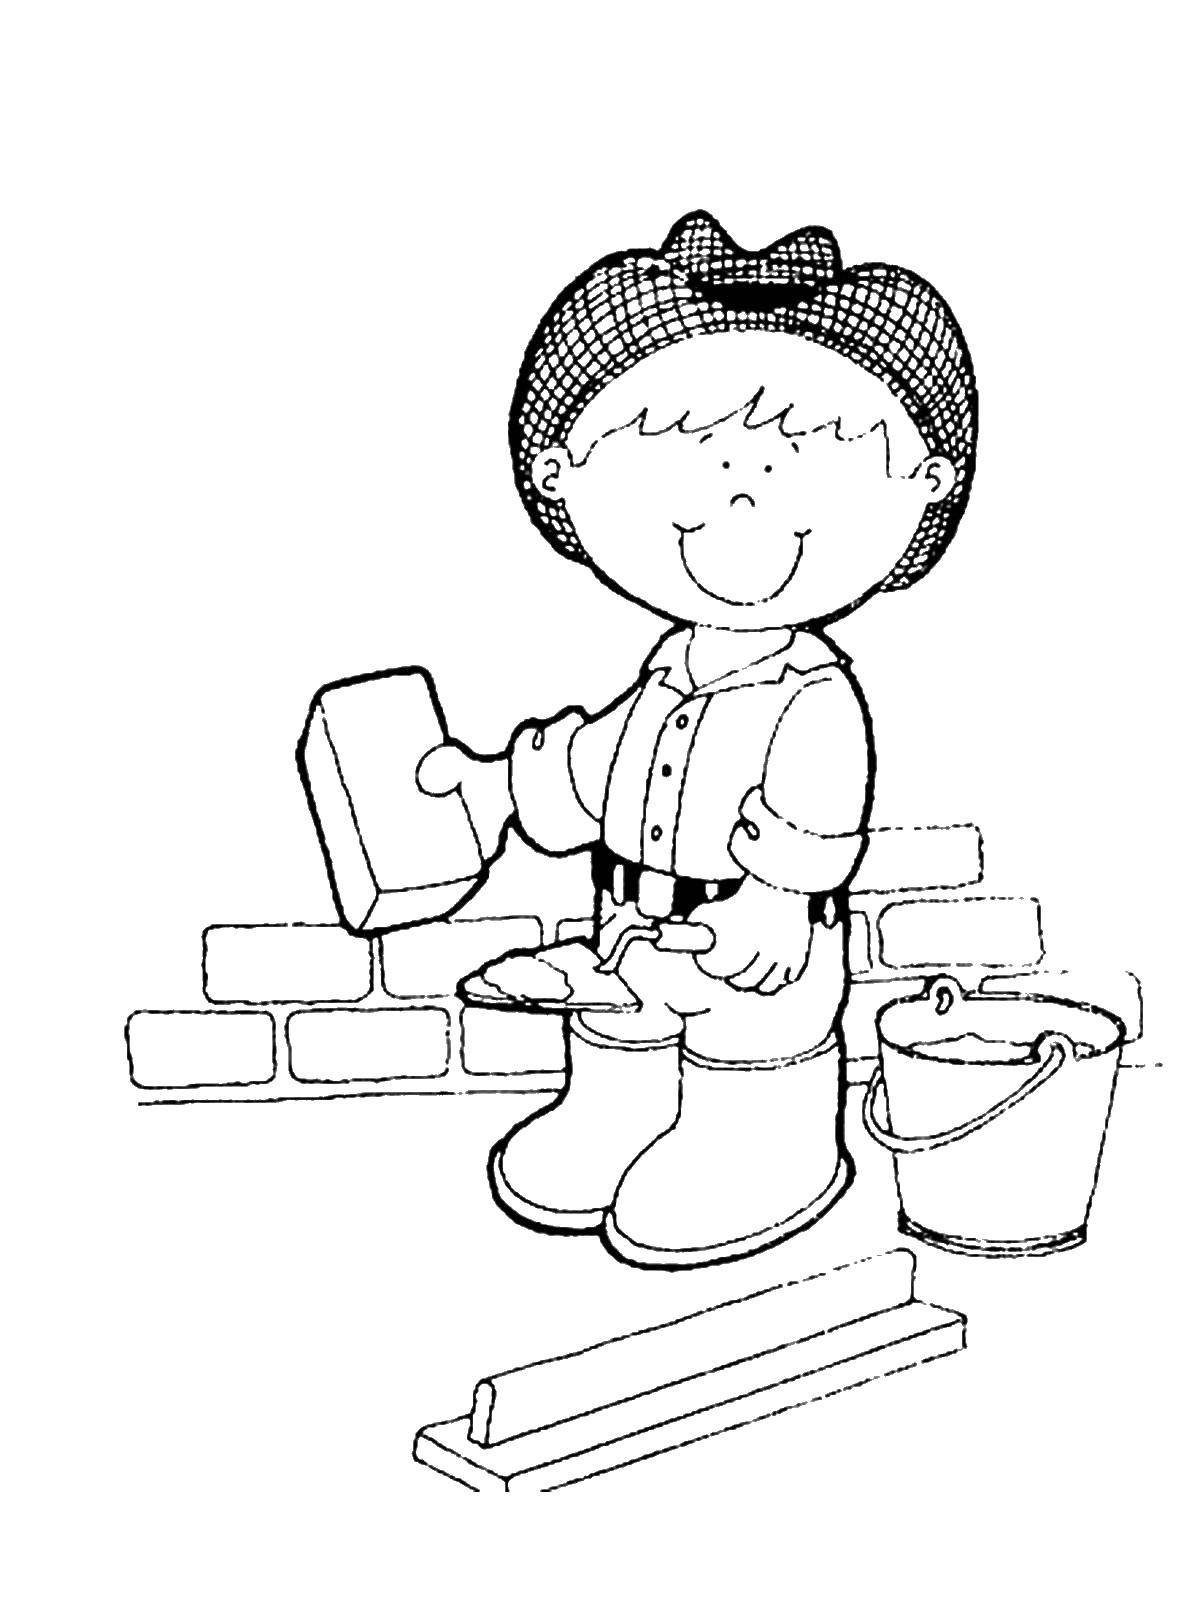 Coloring Builder, construction. Category a profession. Tags:  Profession.